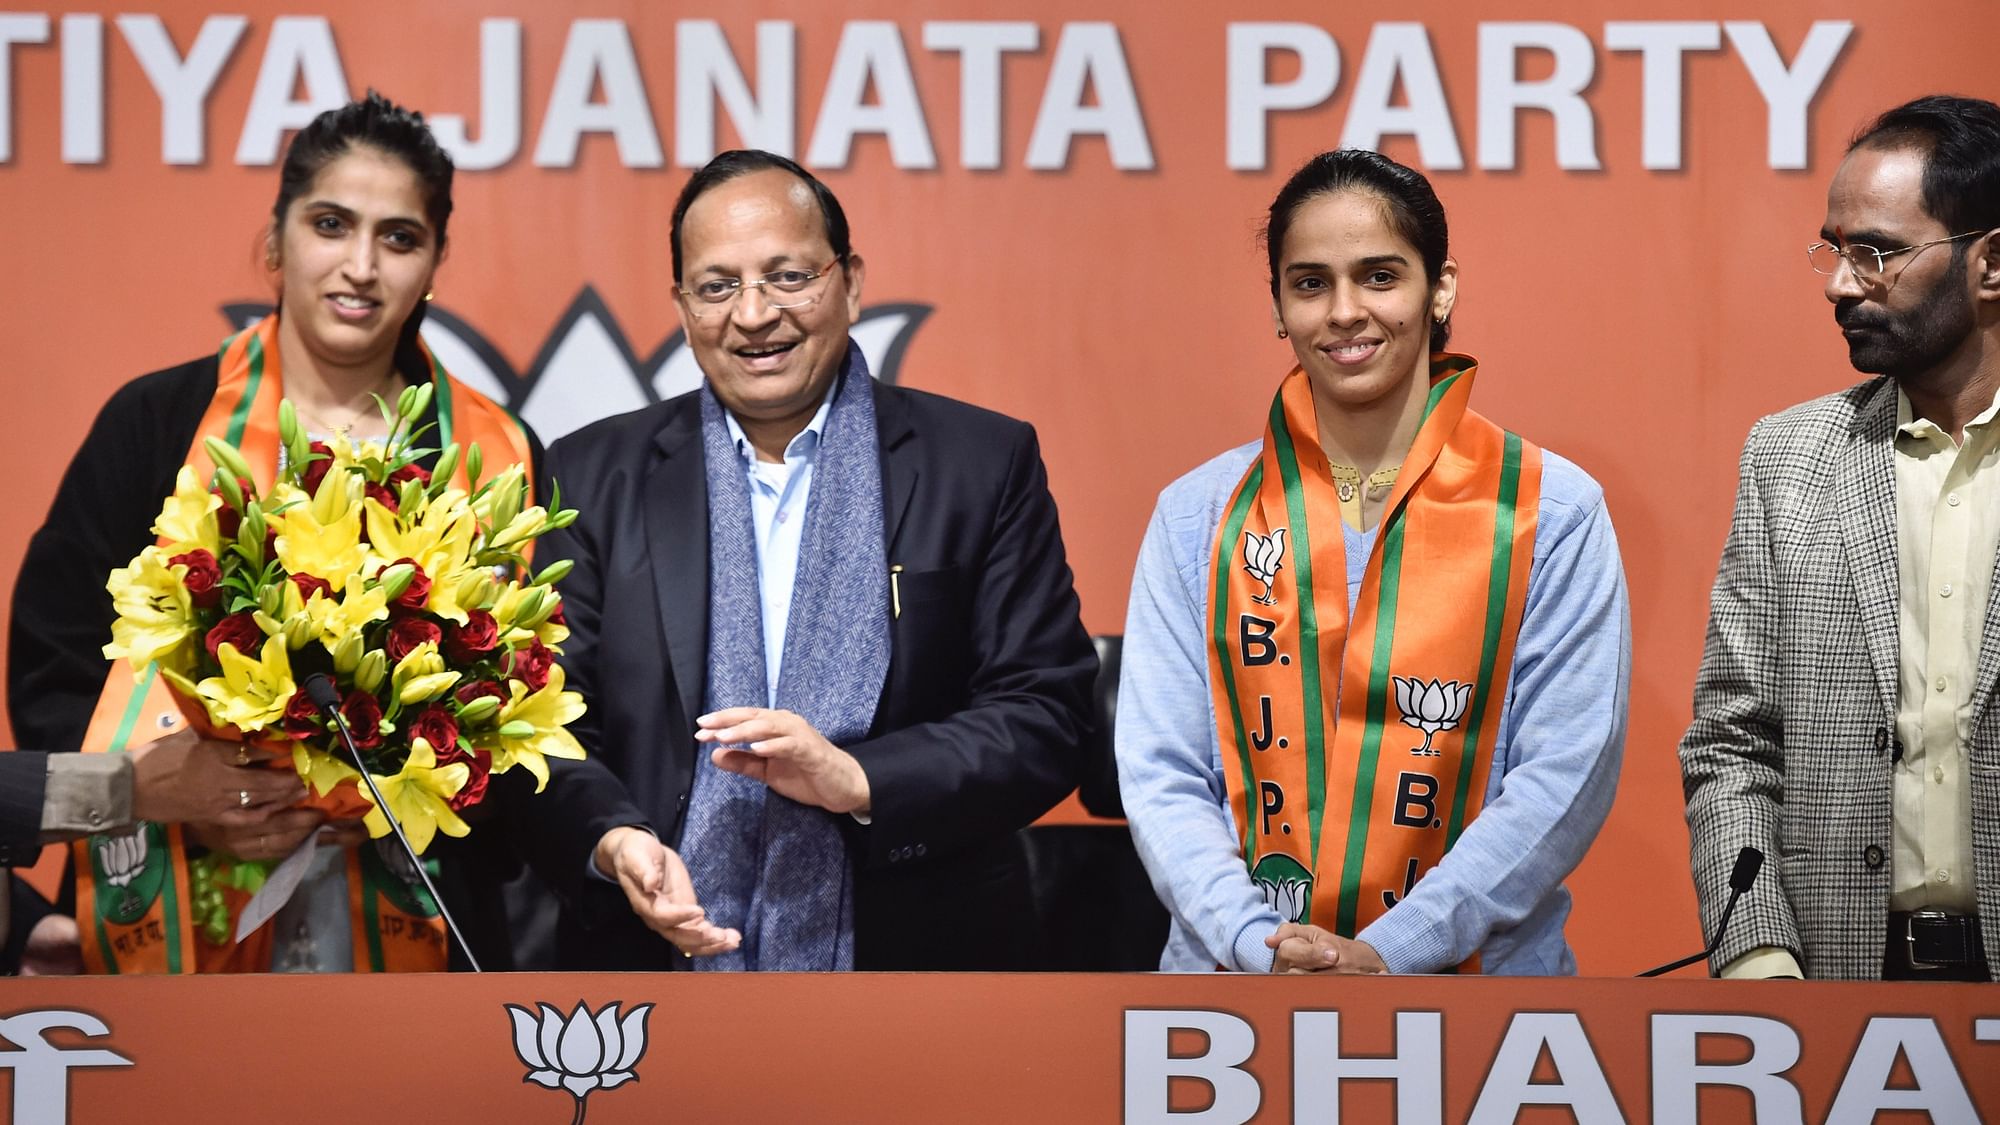 Welcoming star shuttler Saina Nehwal into the party fold, the BJP in Telangana on Thursday, 30 January said her joining the party is indicative of the popularity of the Modi government.